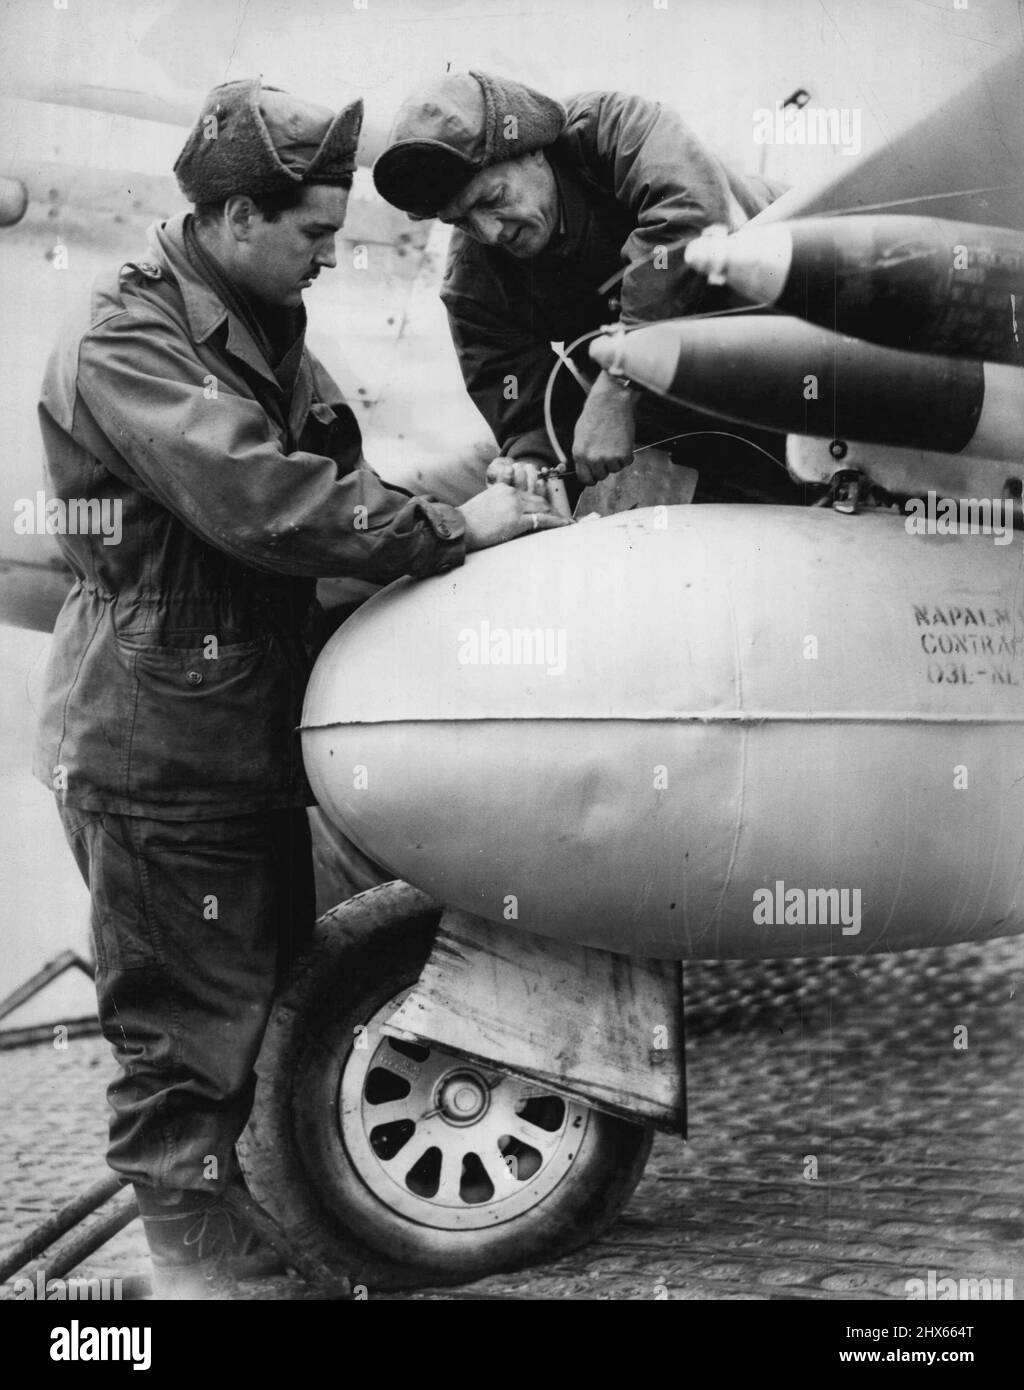 Deadly Napalm bomb being fitted wing rack of Mustang before aircraft took off to attack enemy troops. L to R Lac Ron Ecclis, of Chelsea, Melb, Sgt, Ray Burgum, of Maleny, Qld. December 29, 1950. Stock Photo